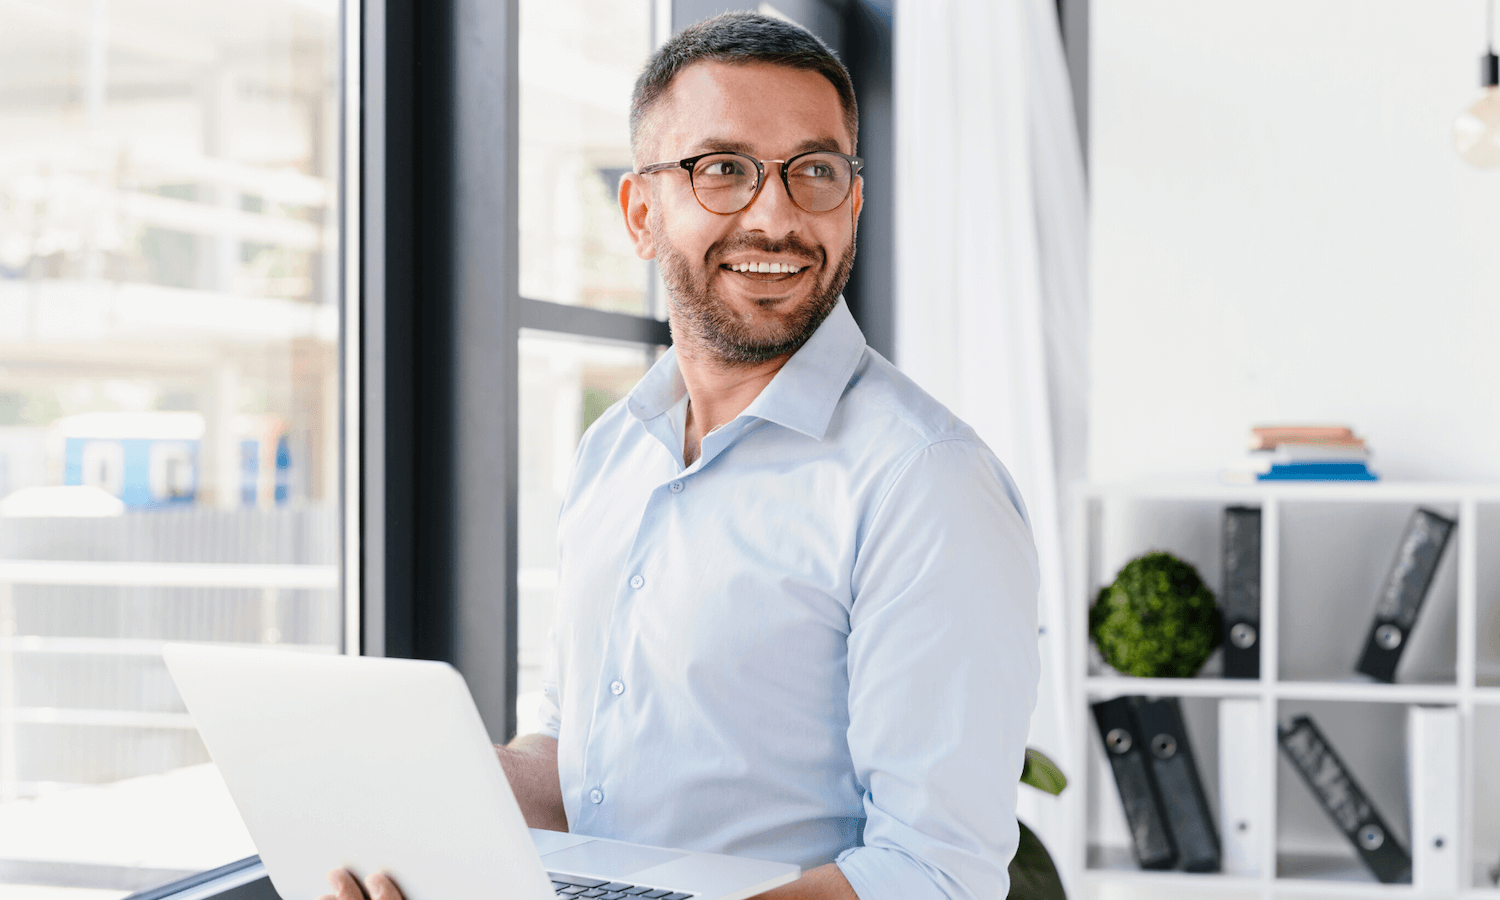 Man looking happily in enterprise office with laptop